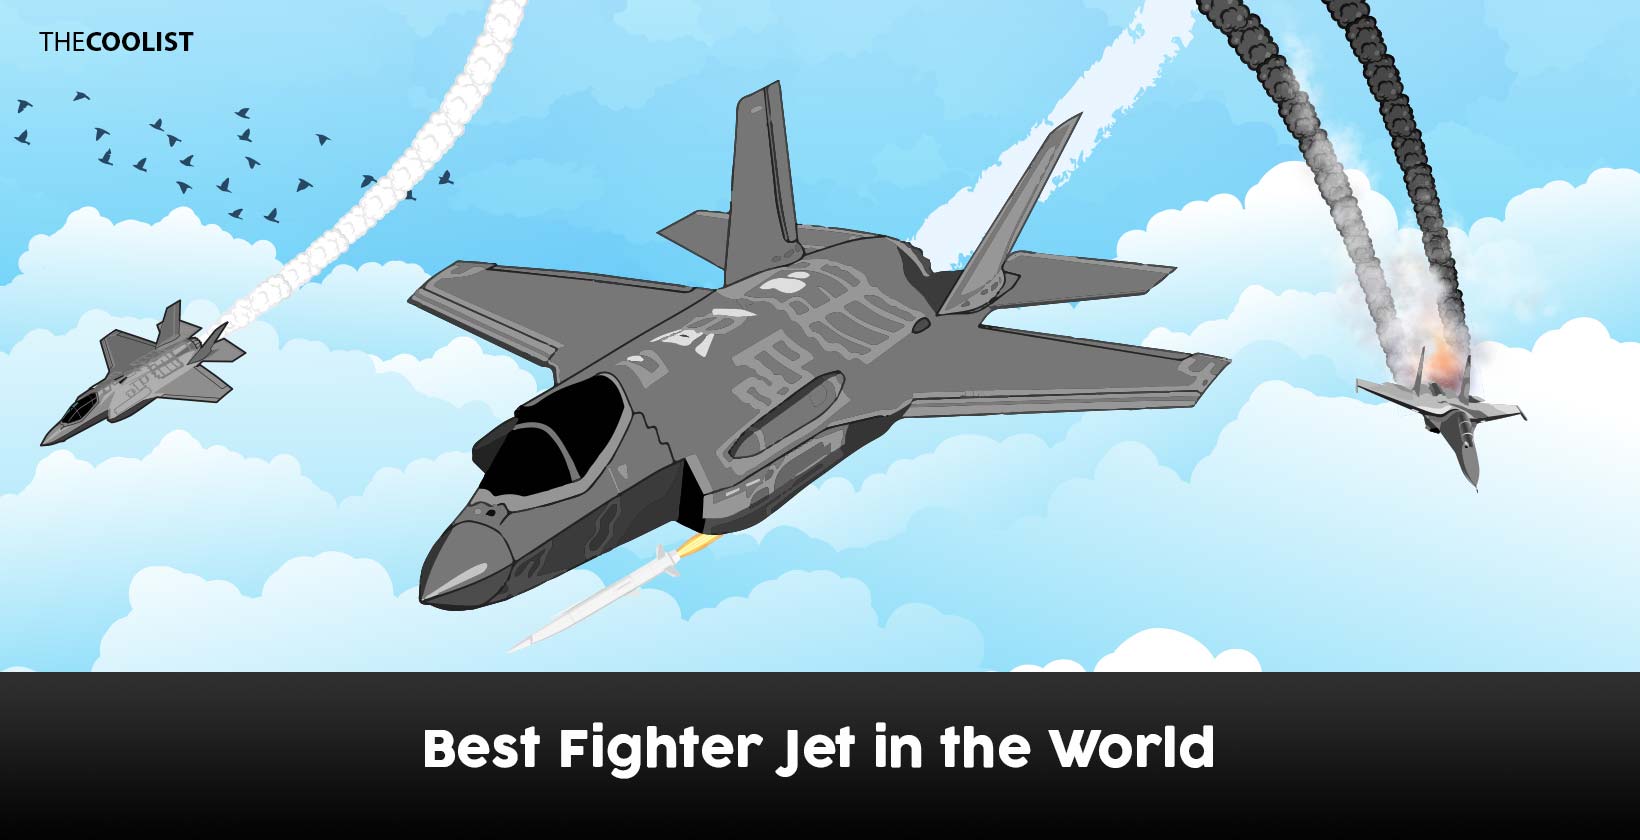 Best Fighter Jet in the World